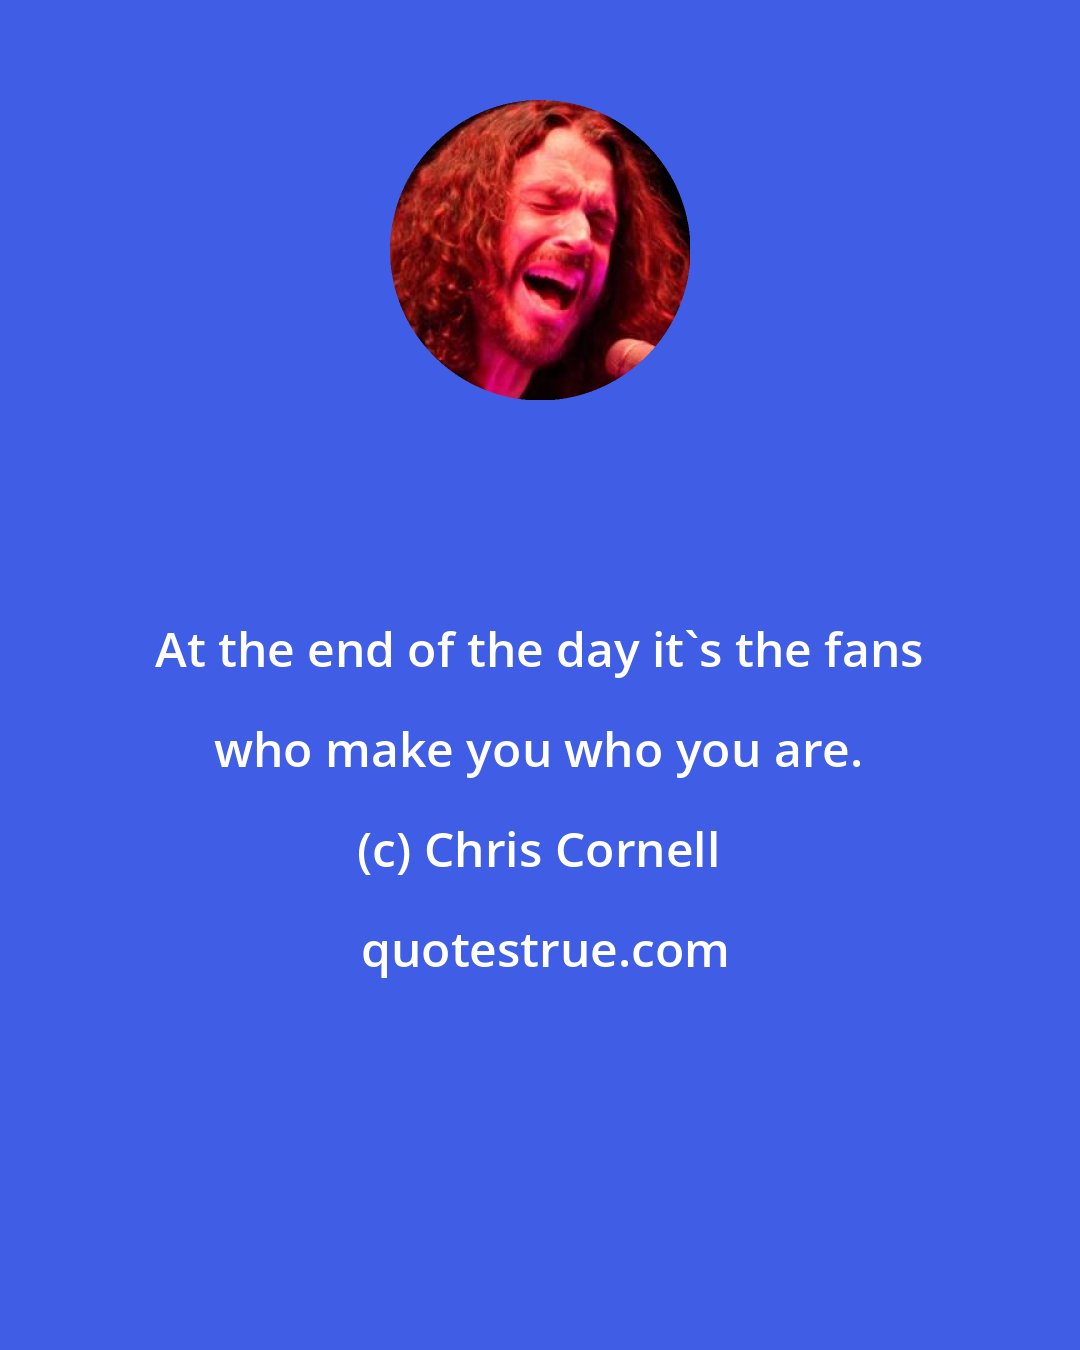 Chris Cornell: At the end of the day it's the fans who make you who you are.